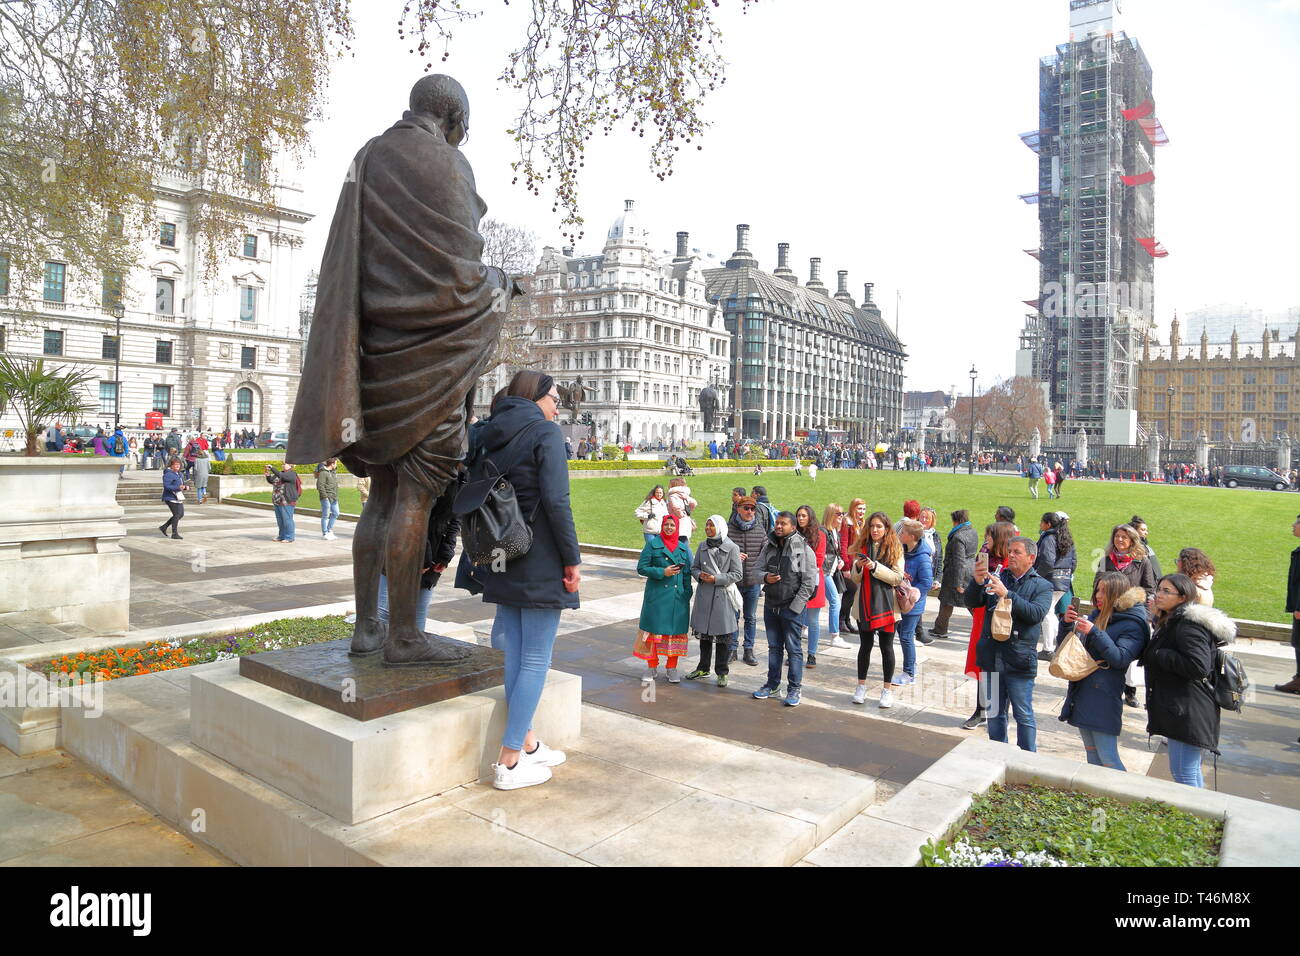 Tourists taking photos with the bronze sculpture of Mahatma Ghandi in the City of Westminster, London, UK Stock Photo